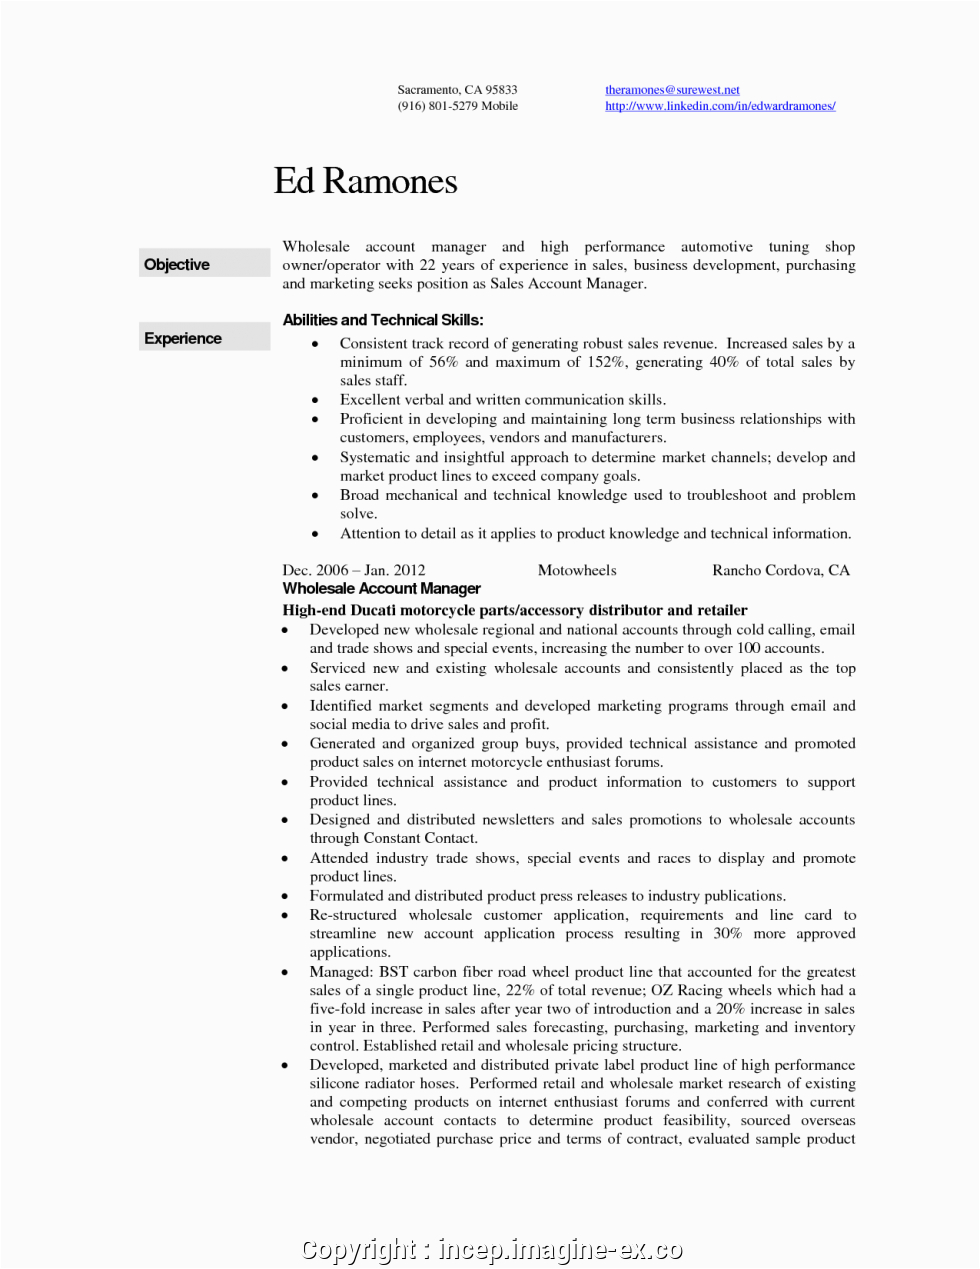 Sample Resume for Auto Parts Manager Modern Automotive Store Manager Resume Auto Parts Manager